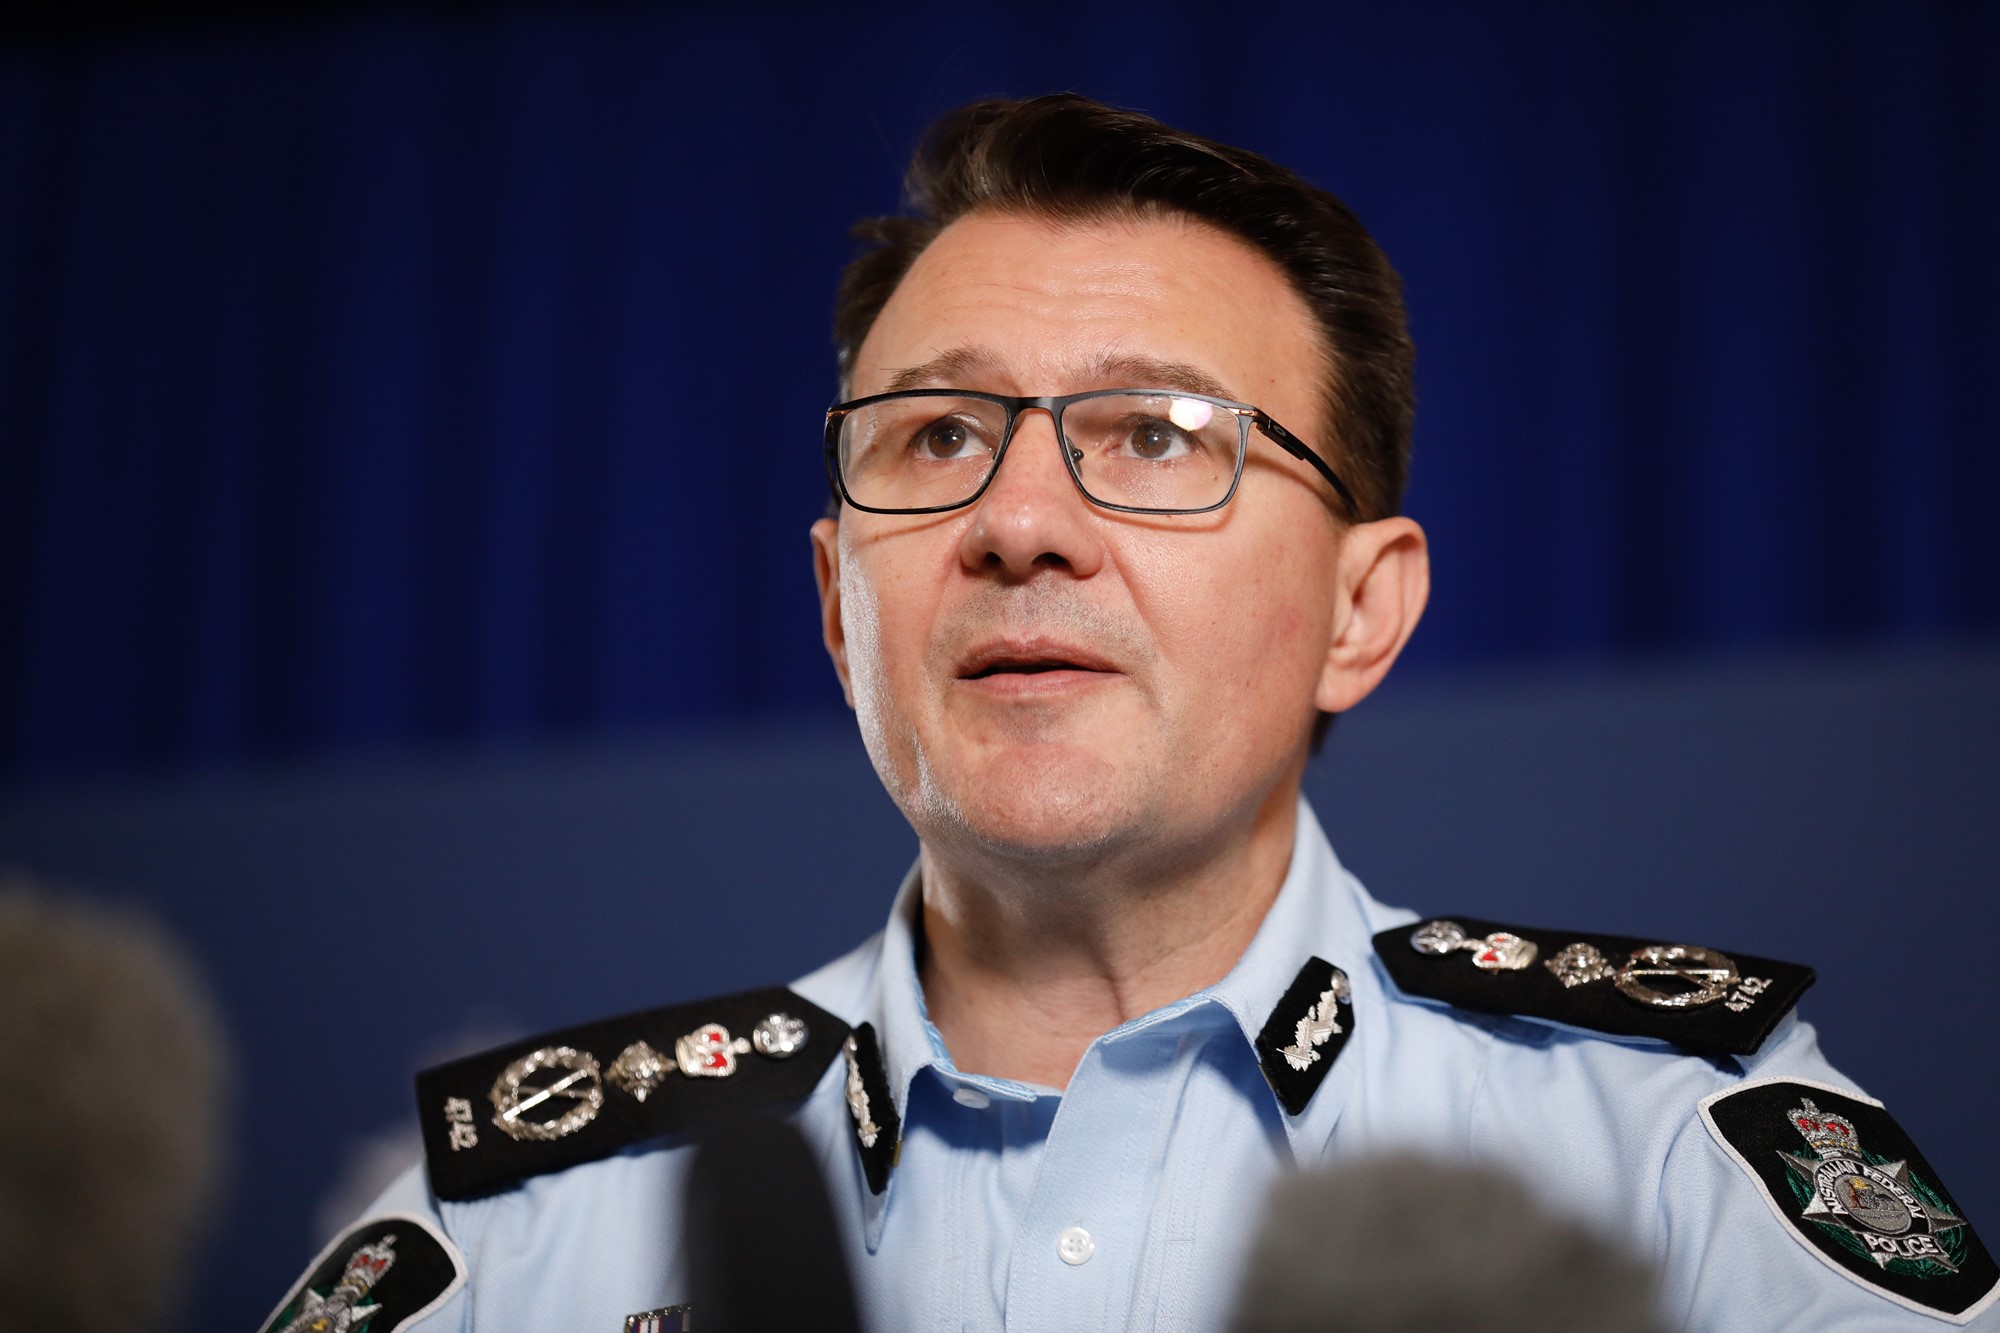 A man in an AFP uniform and glasses stands behind a podium addressing the media